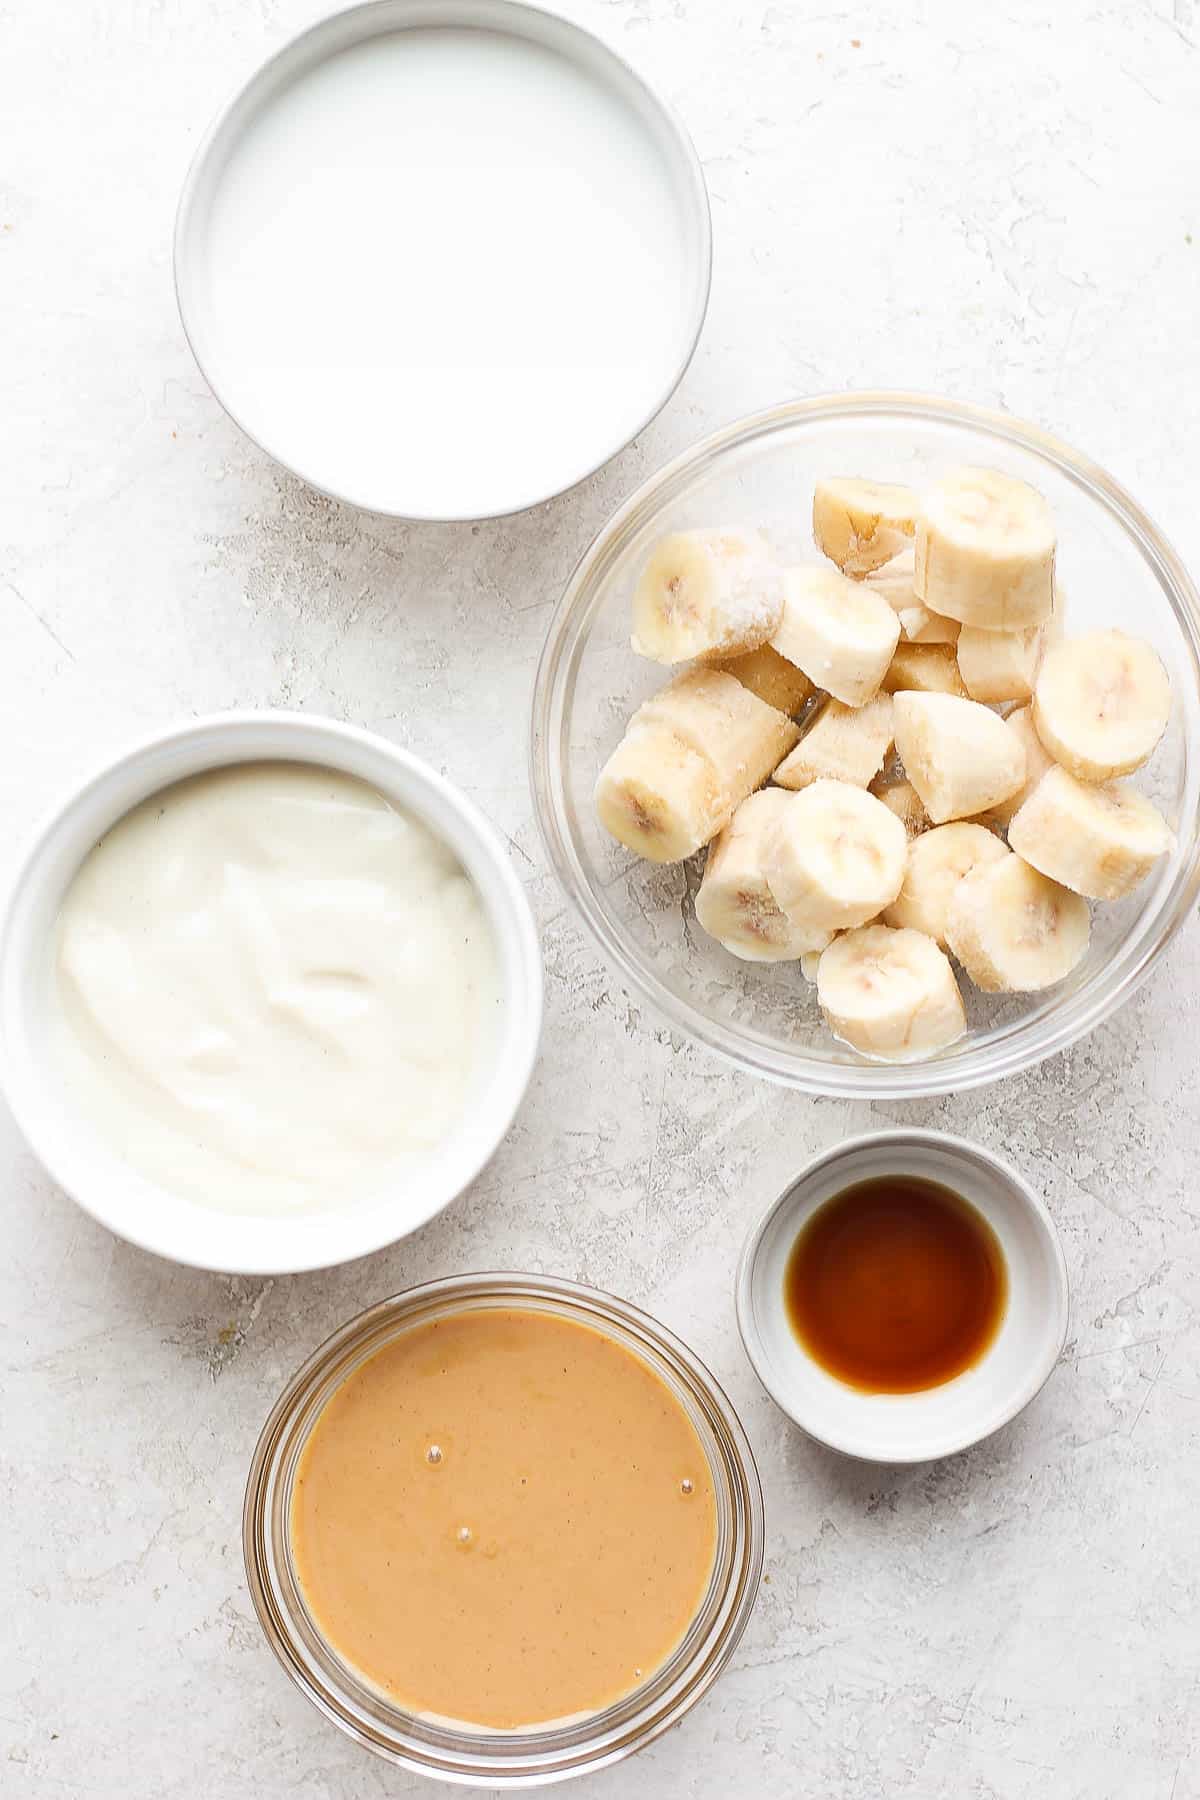 Peanut butter banana smoothie ingredients in small dishes.